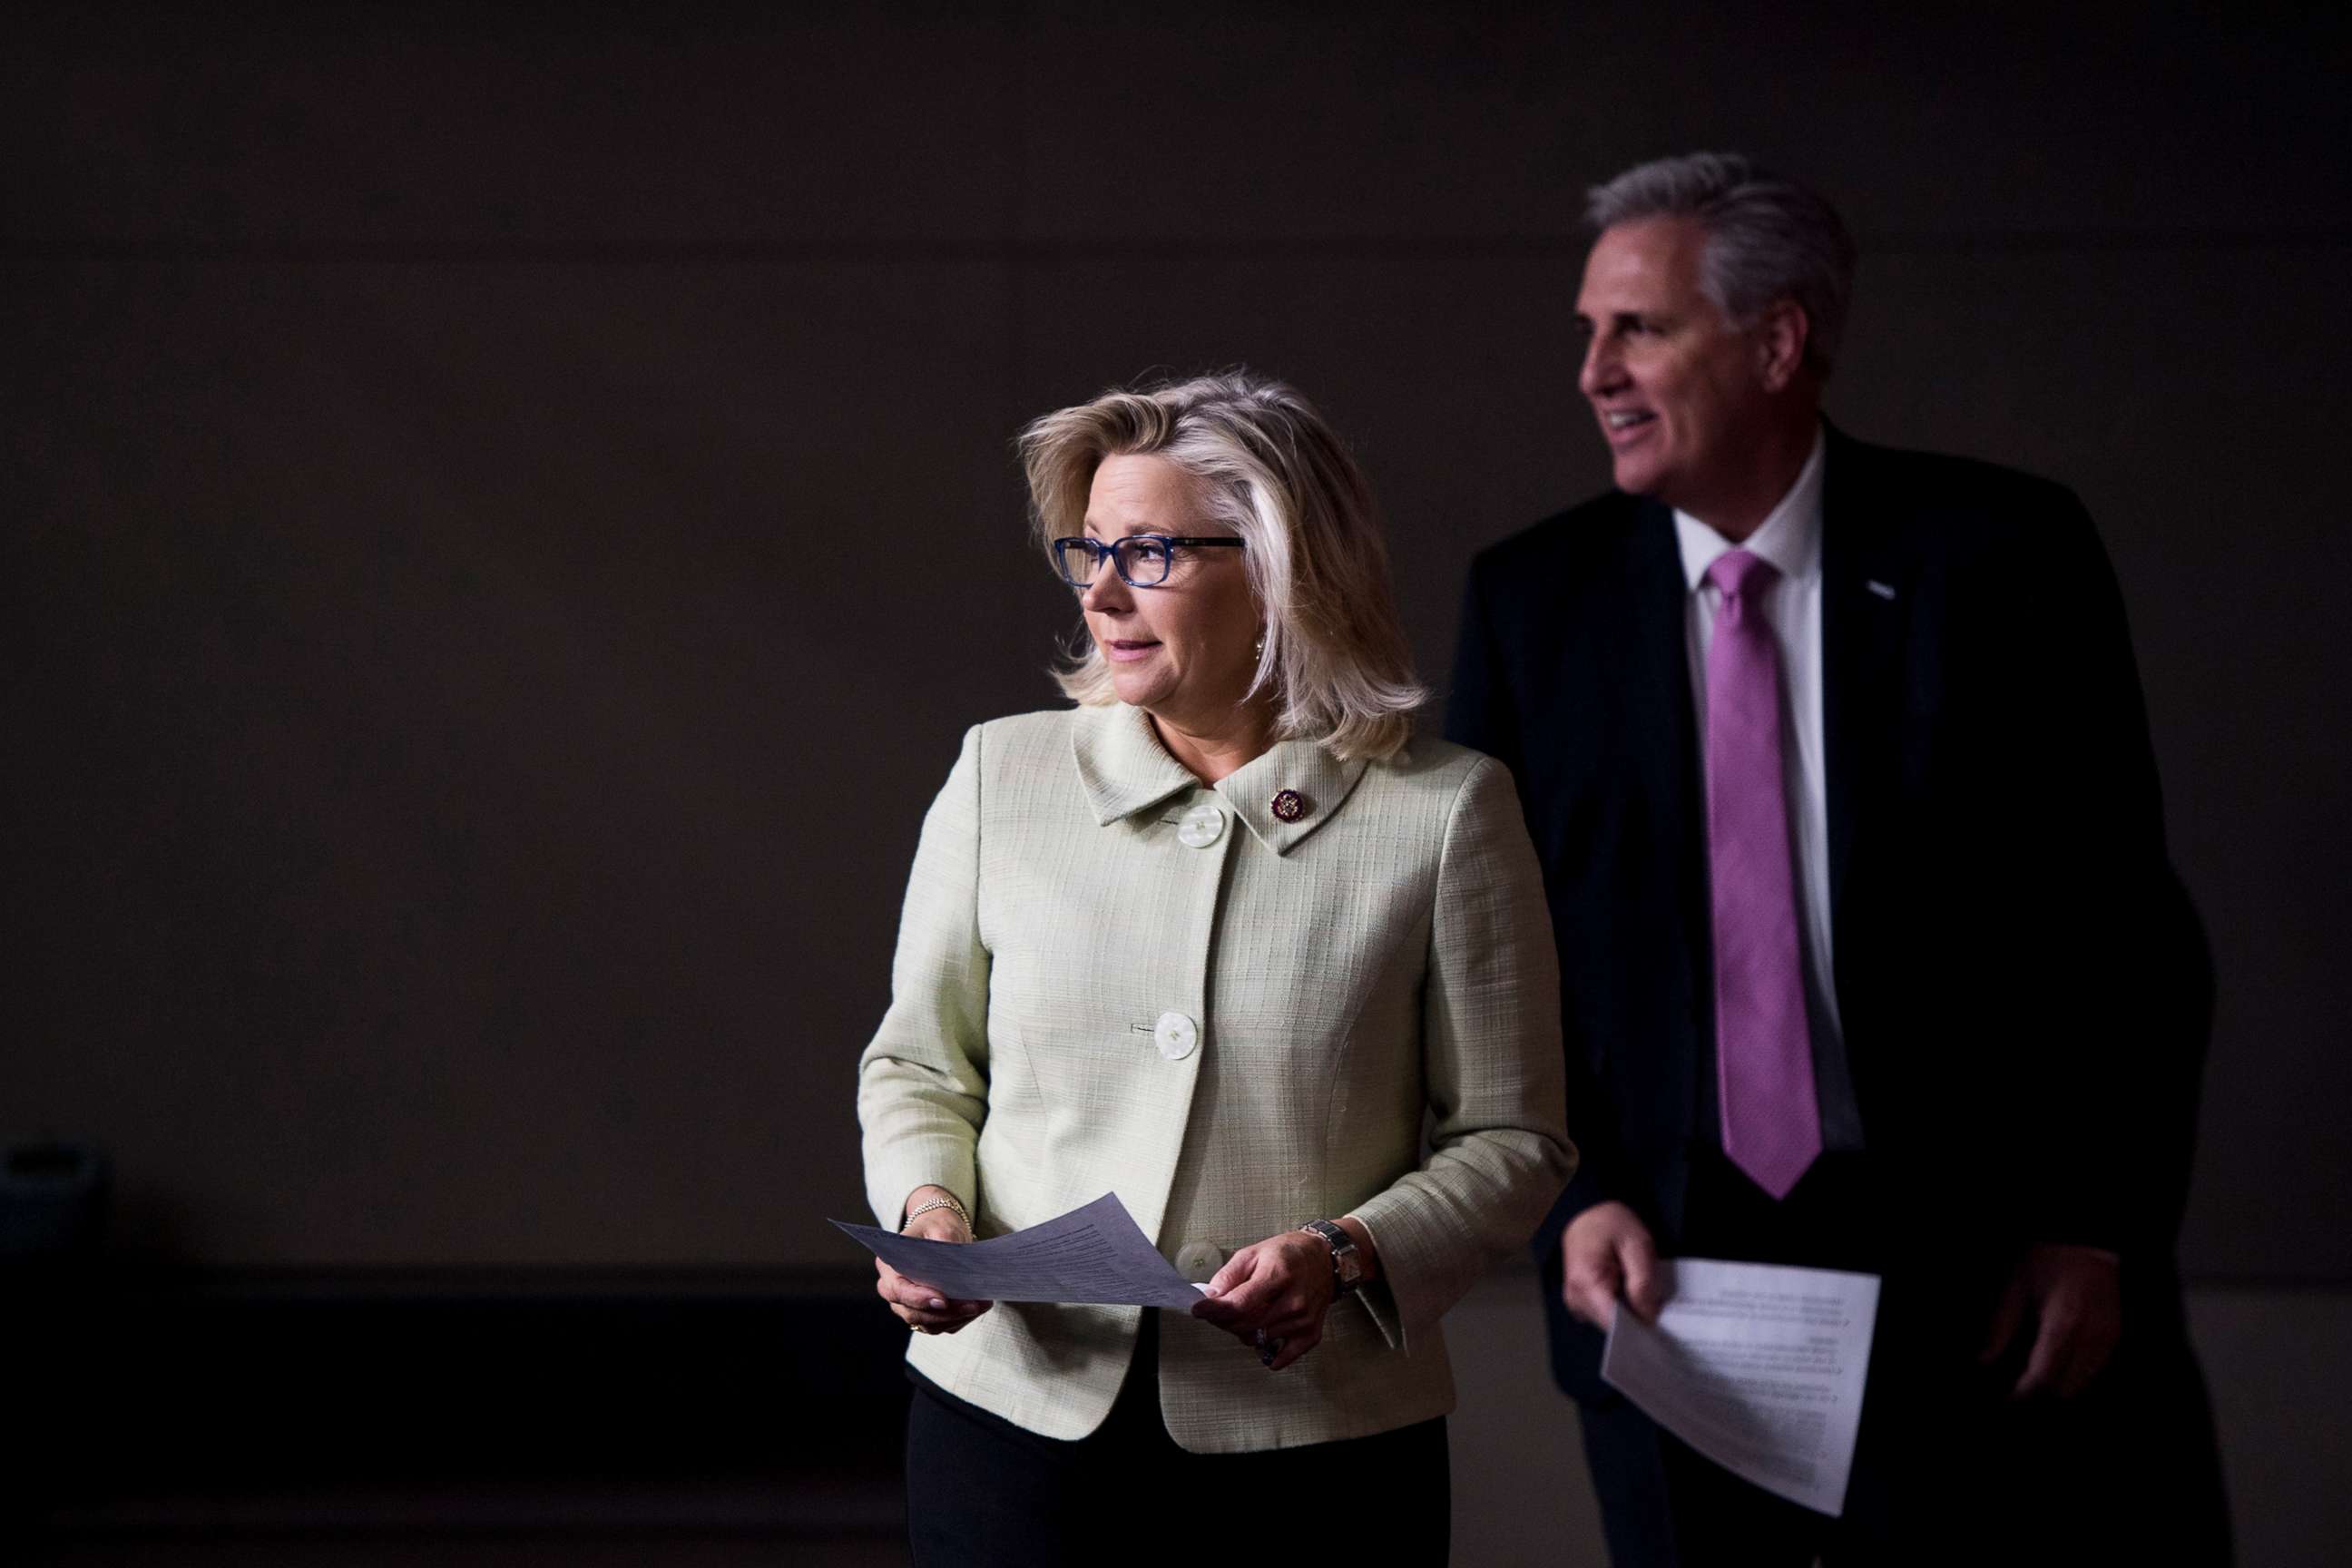 PHOTO: Republican Conference Chair Liz Cheney and House Minority Leader Kevin McCarthy, arrive for their post-caucus press conference at the Capitol, March 26, 2019. 